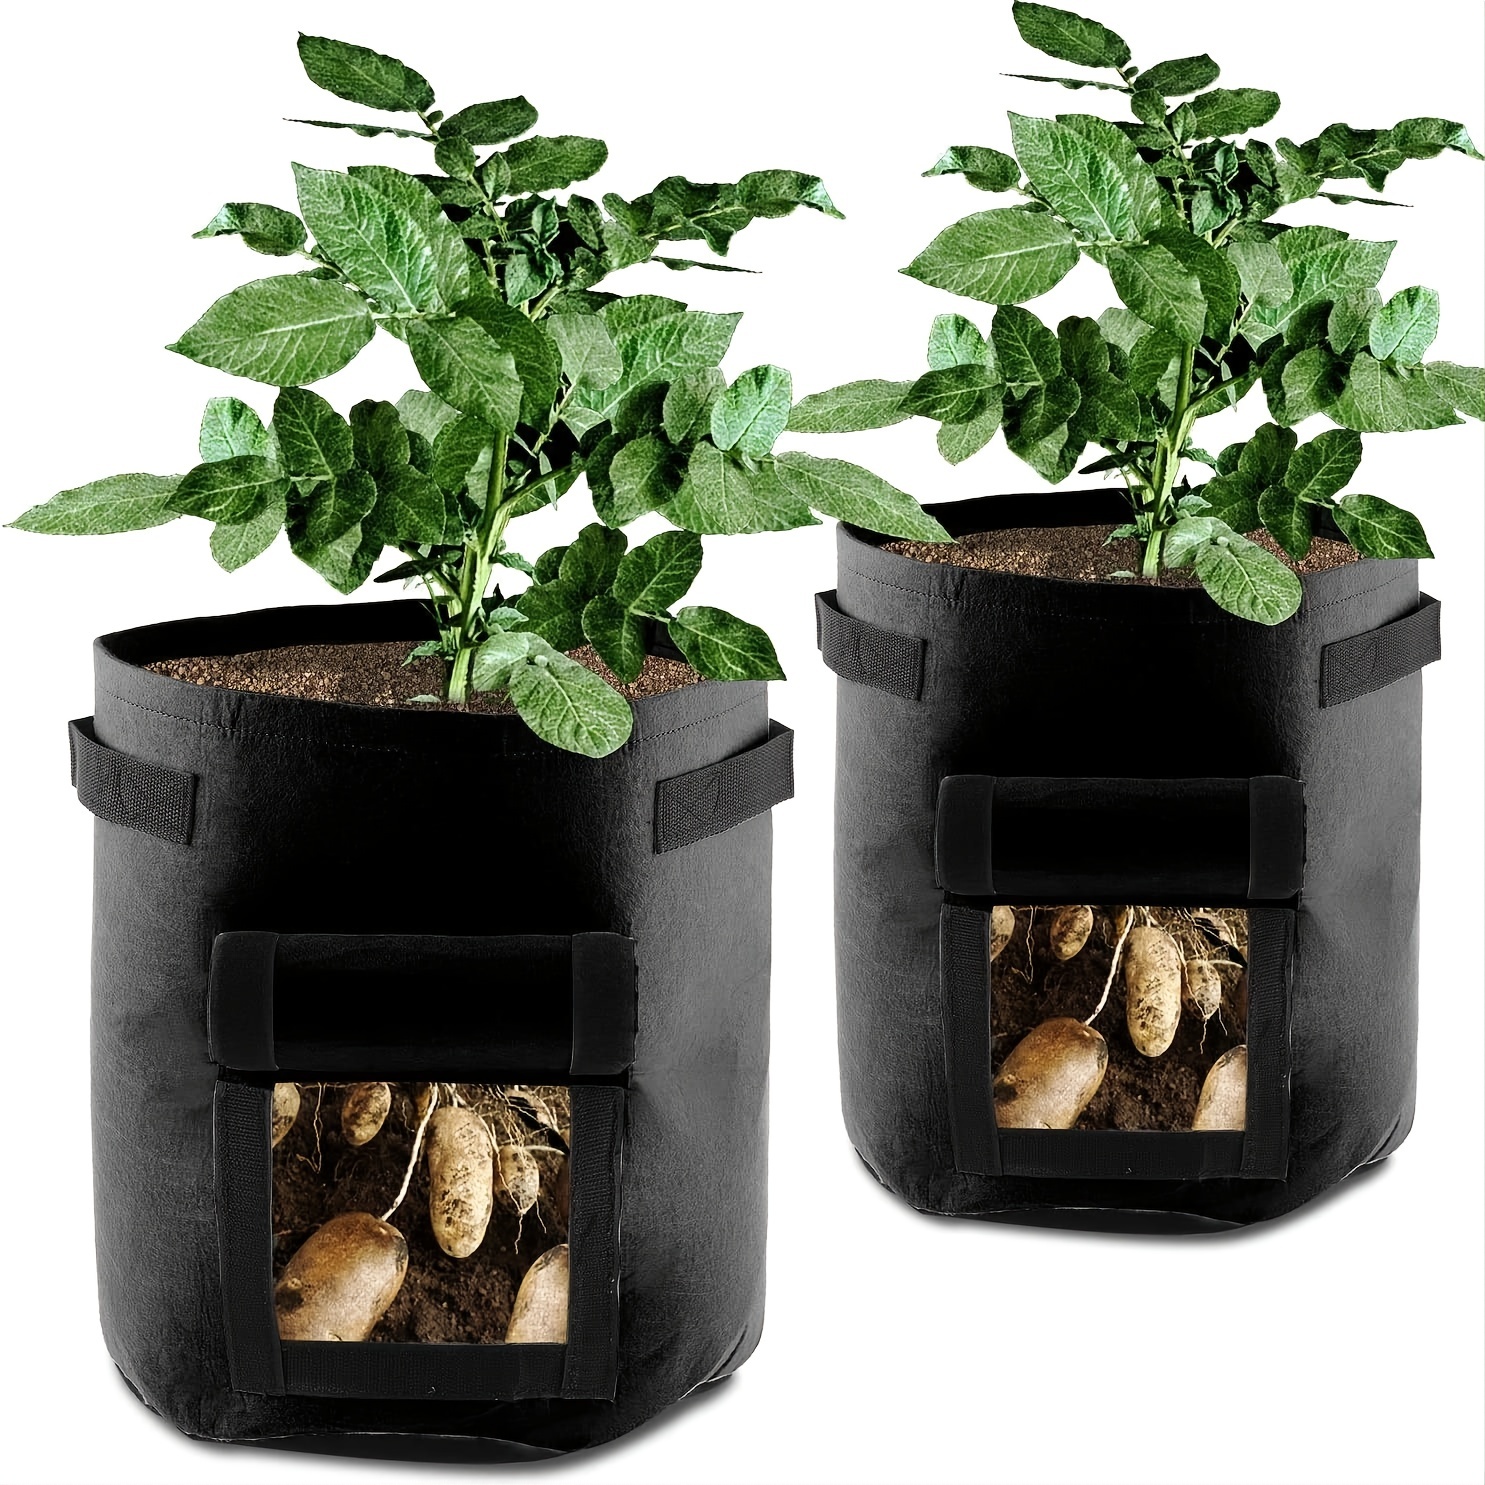 JJGoo Potato Grow Bags, 4 Pack 10 Gallon with Flap and Handles Planter Pots  for Onion, Fruits, Tomato, Carrot - Green